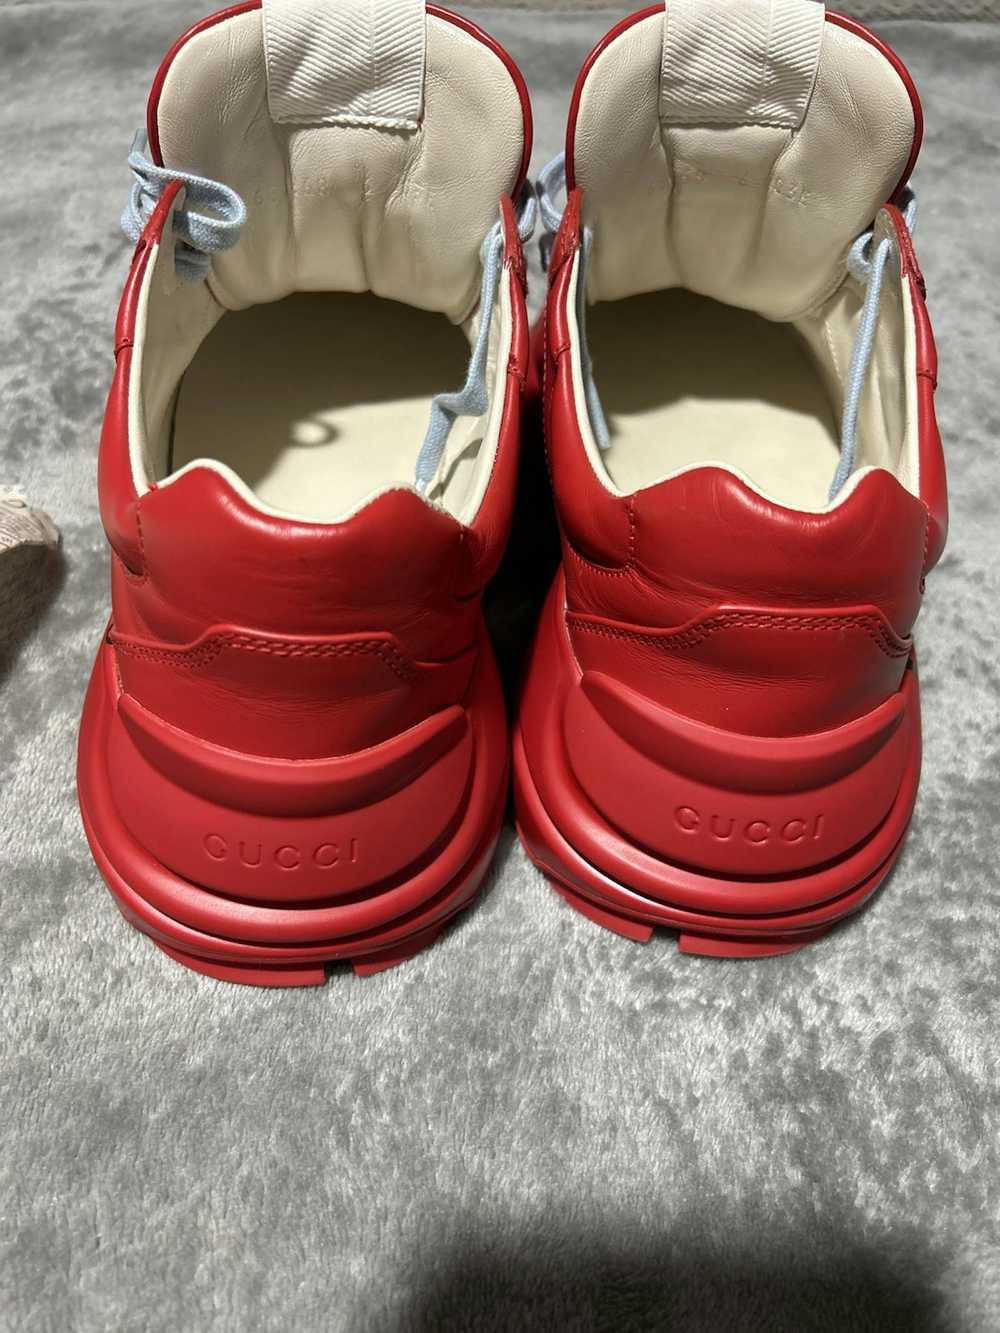 Gucci Gucci 100 Rython sneakers - image 10